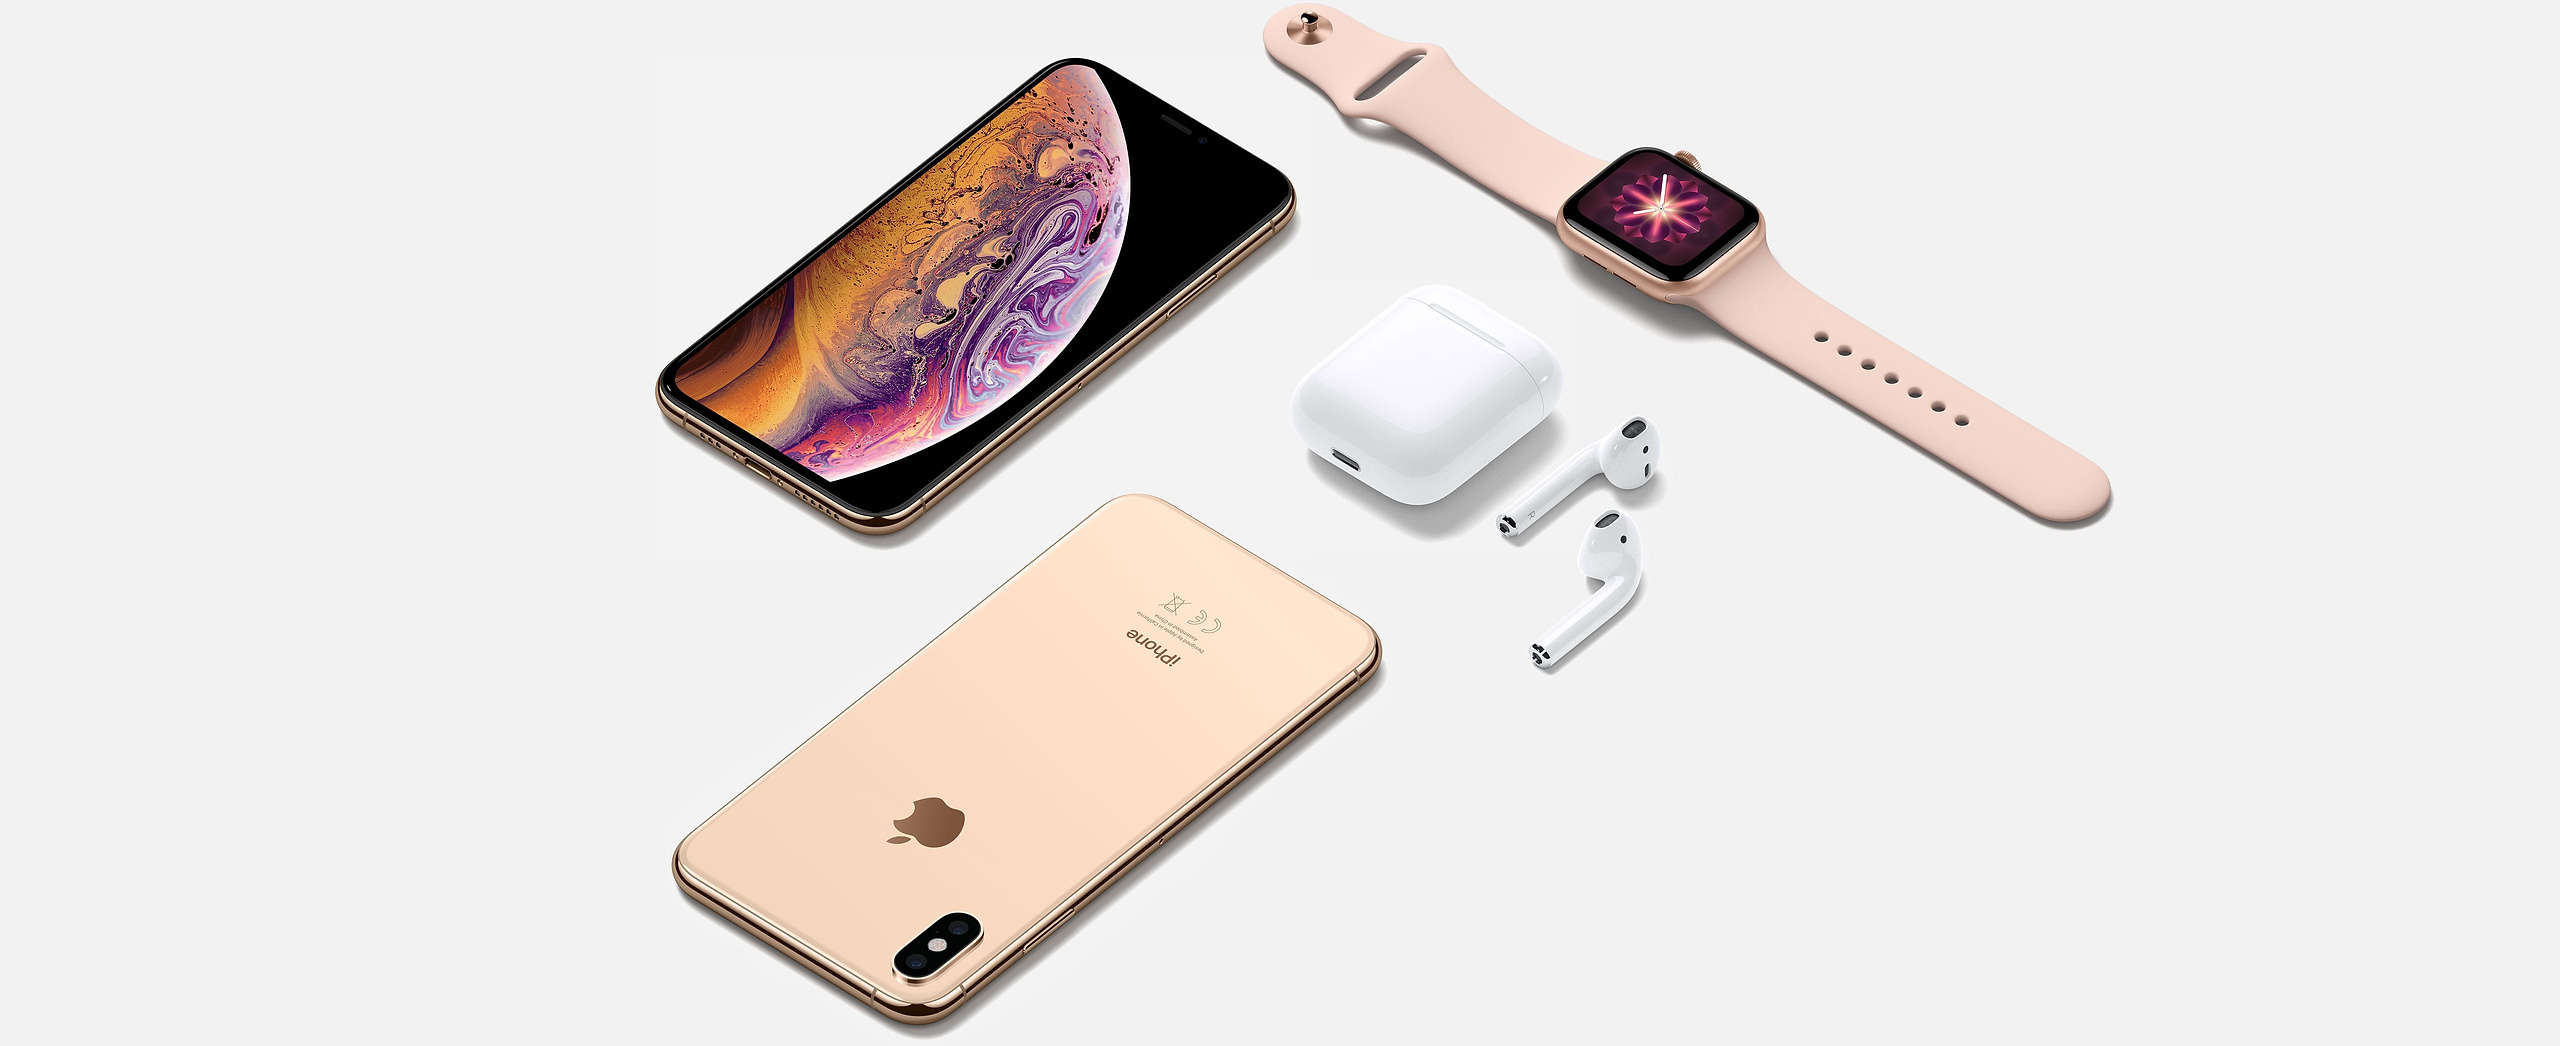 apple-products-section1-one-holiday-201811_GEO_EMEA.jpg